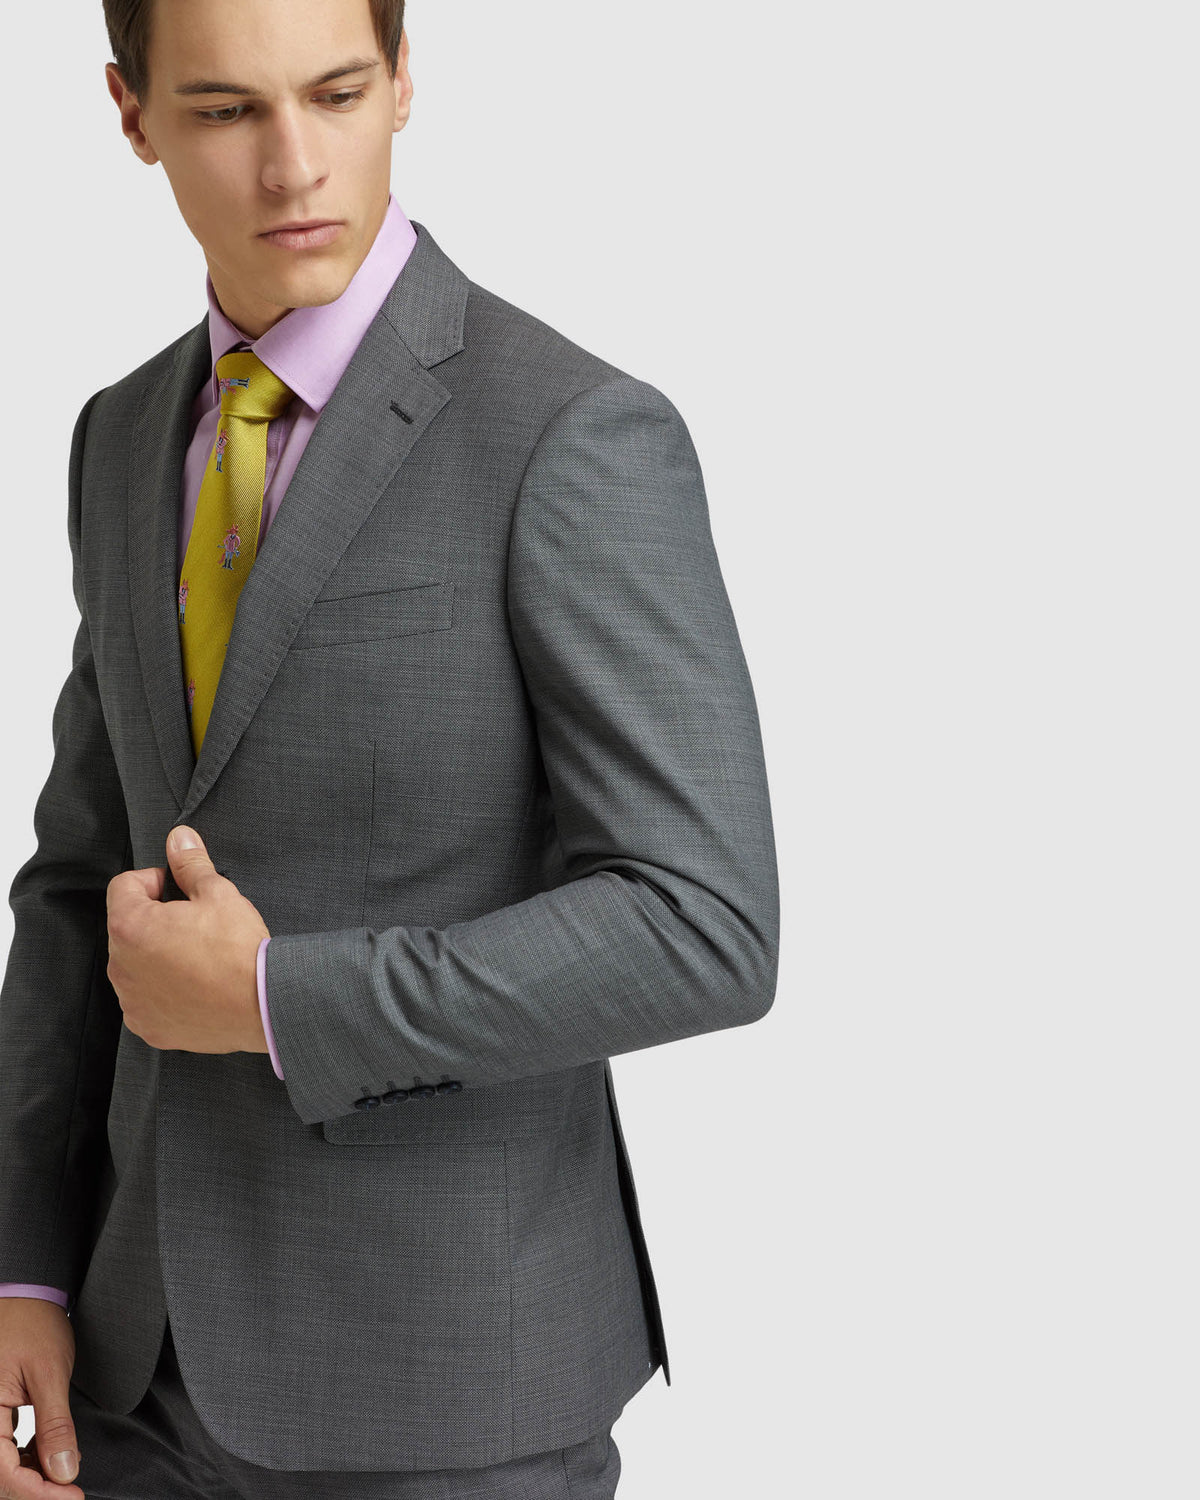 BYRON WOOL SUIT JACKET CHARCOAL